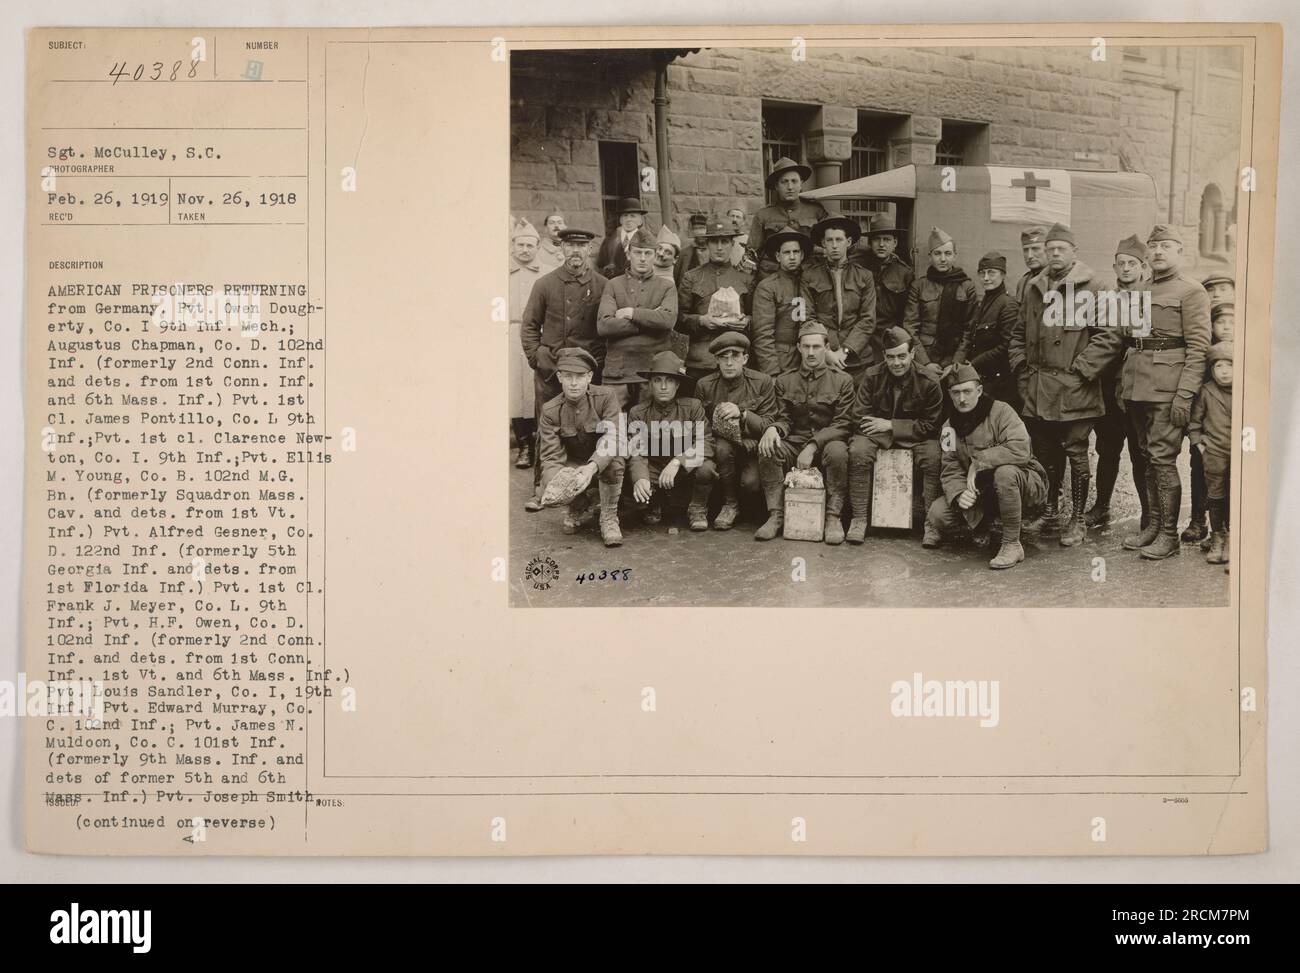 American prisoners returning from Germany. The individuals in the photograph include Sgt. McCulley and several privates from various infantry and cavalry units. Some of them previously served in different state infantry units. Names listed are Pvt. Owen Dougherty, Augustus Chapman, Pvt. 1st cl. James Pontillo, Pvt. 1st cl. Clarence Newton, Pvt. Ellis M. Young, Pvt. Alfred Gesner, Pvt. 1st cl. Frank J. Meyer, Pvt. H.F. Owen, Pvt. Louis Sandler, Pvt. Edward Murray, and Pvt. James M. Muldoon. (continued on reverse) Stock Photo